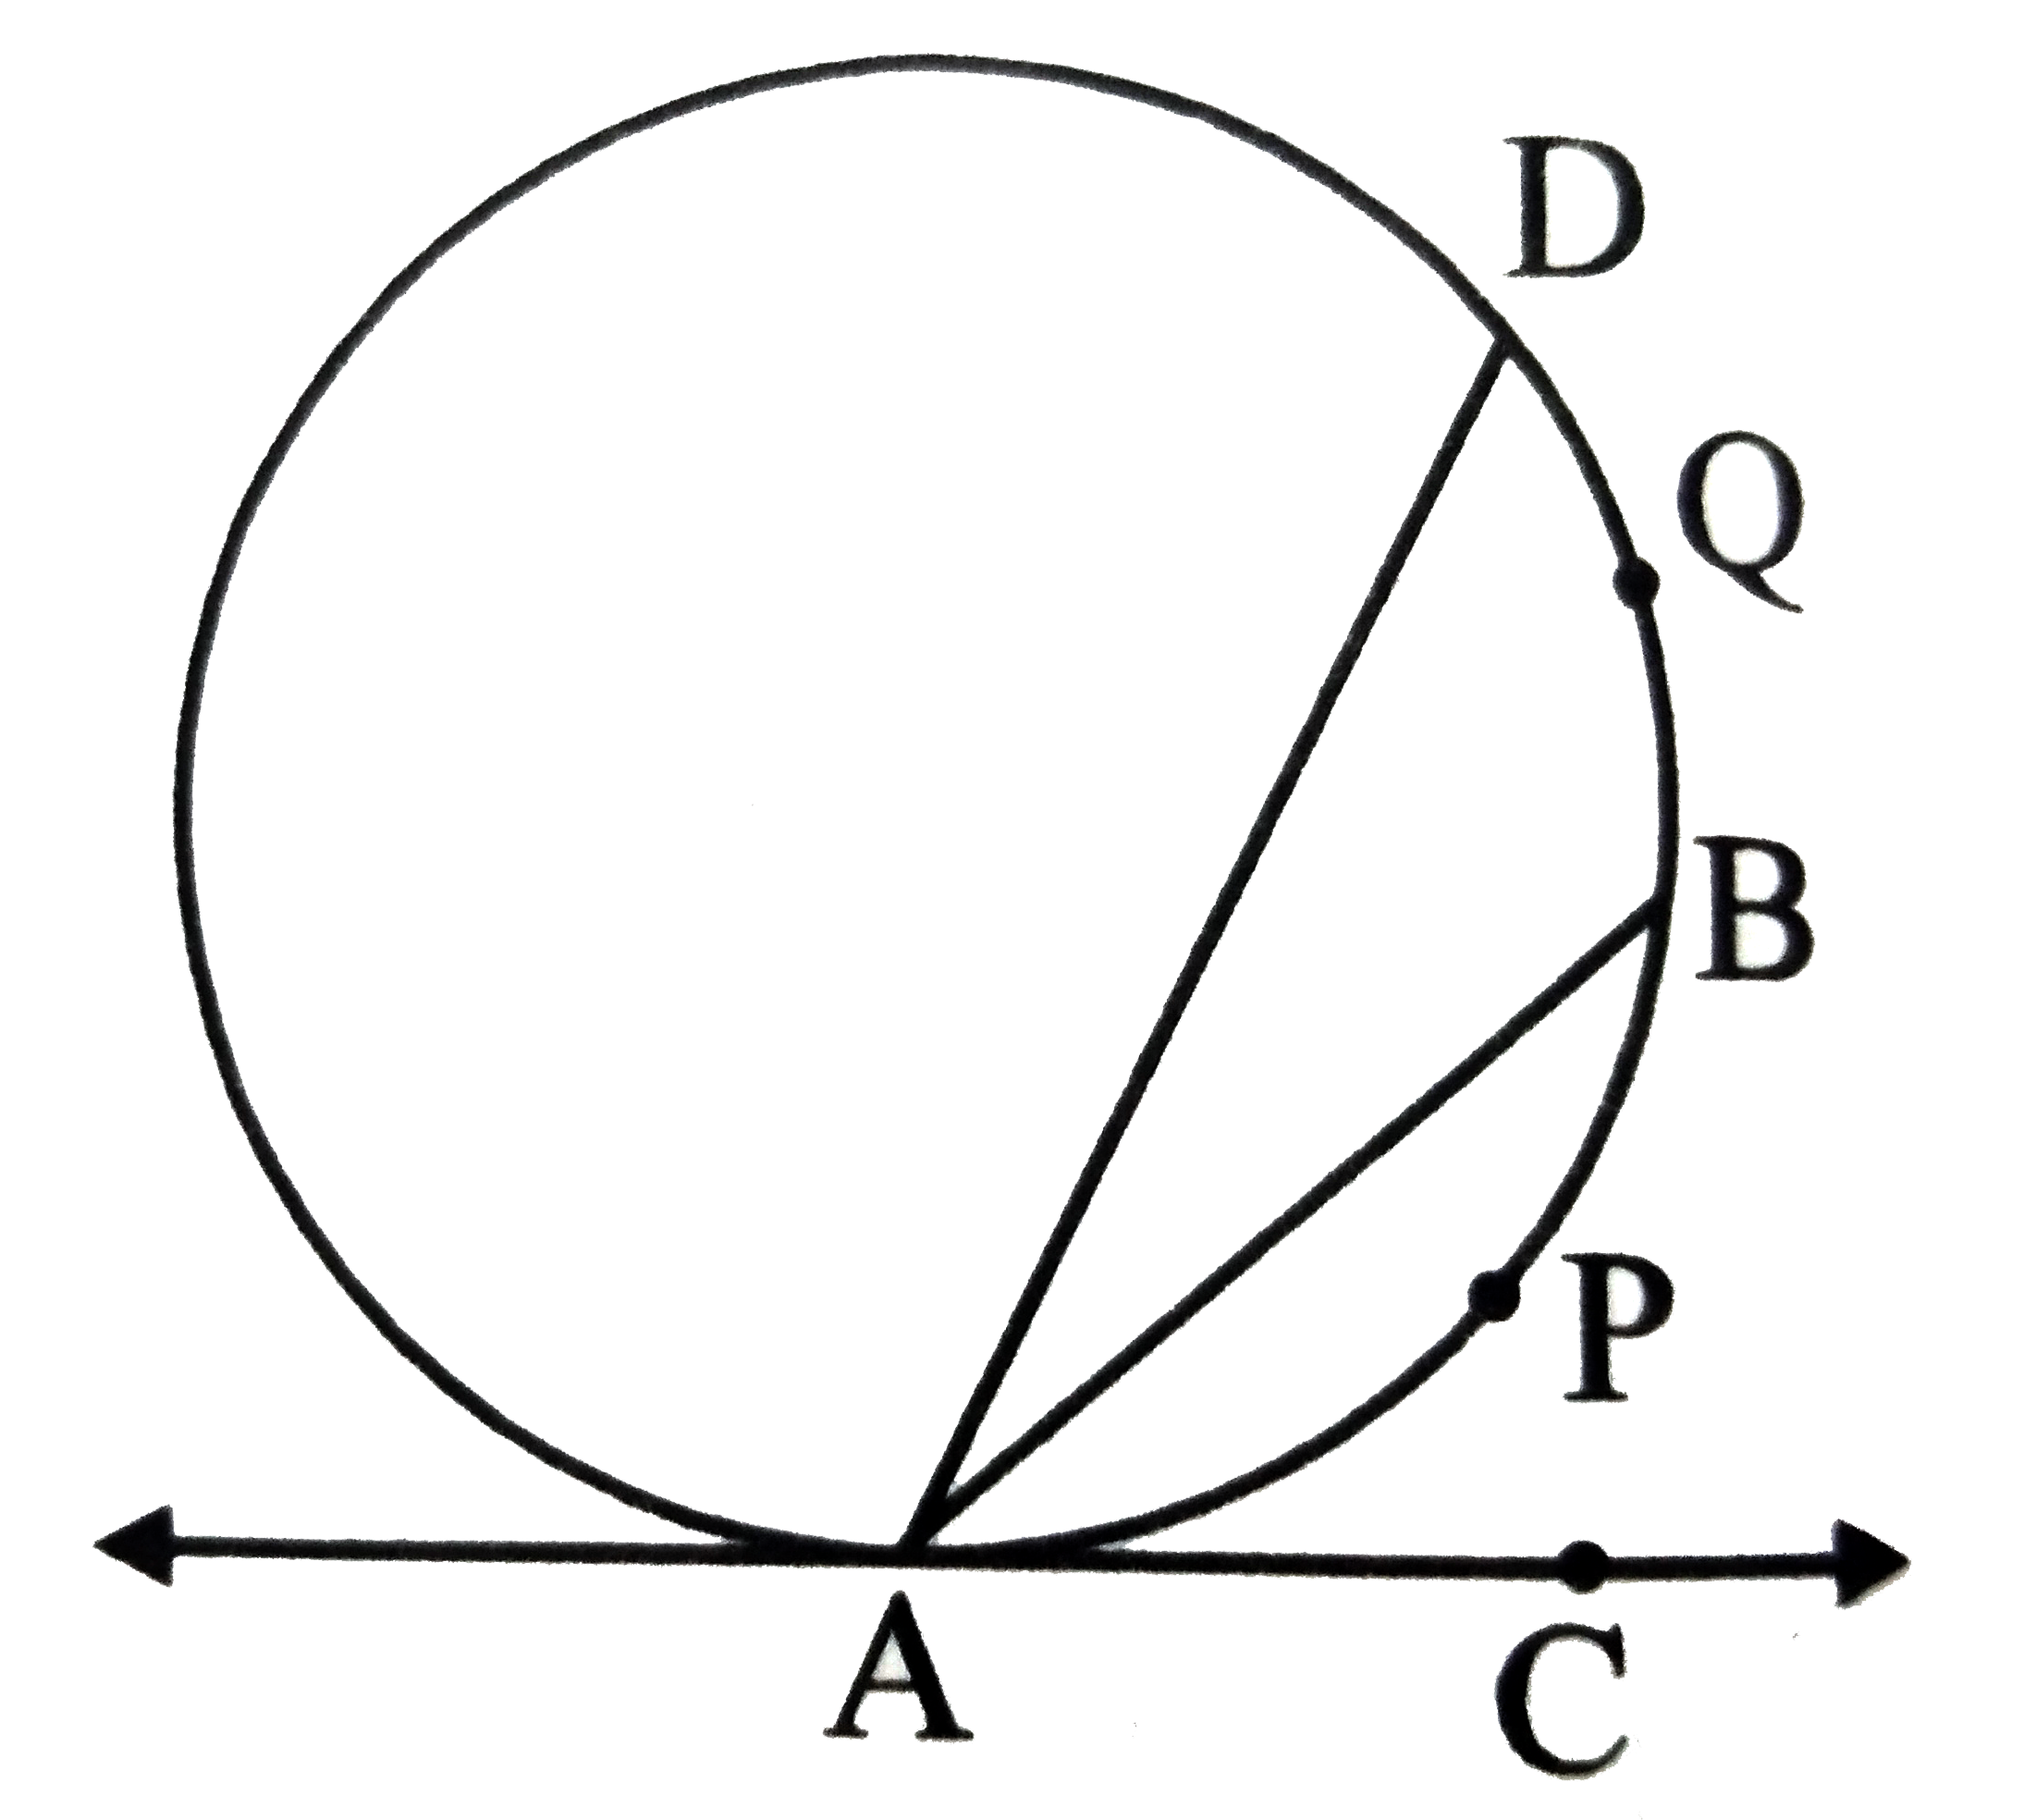 In the adjoining figure, seg AB and seg AD are chords of the circle . C is a point on tangent to the circle at point A. IF m(arc APB)=80^@and angleBAD=30^@, then find    (i) angleBAC (ii) m(arc BQD)